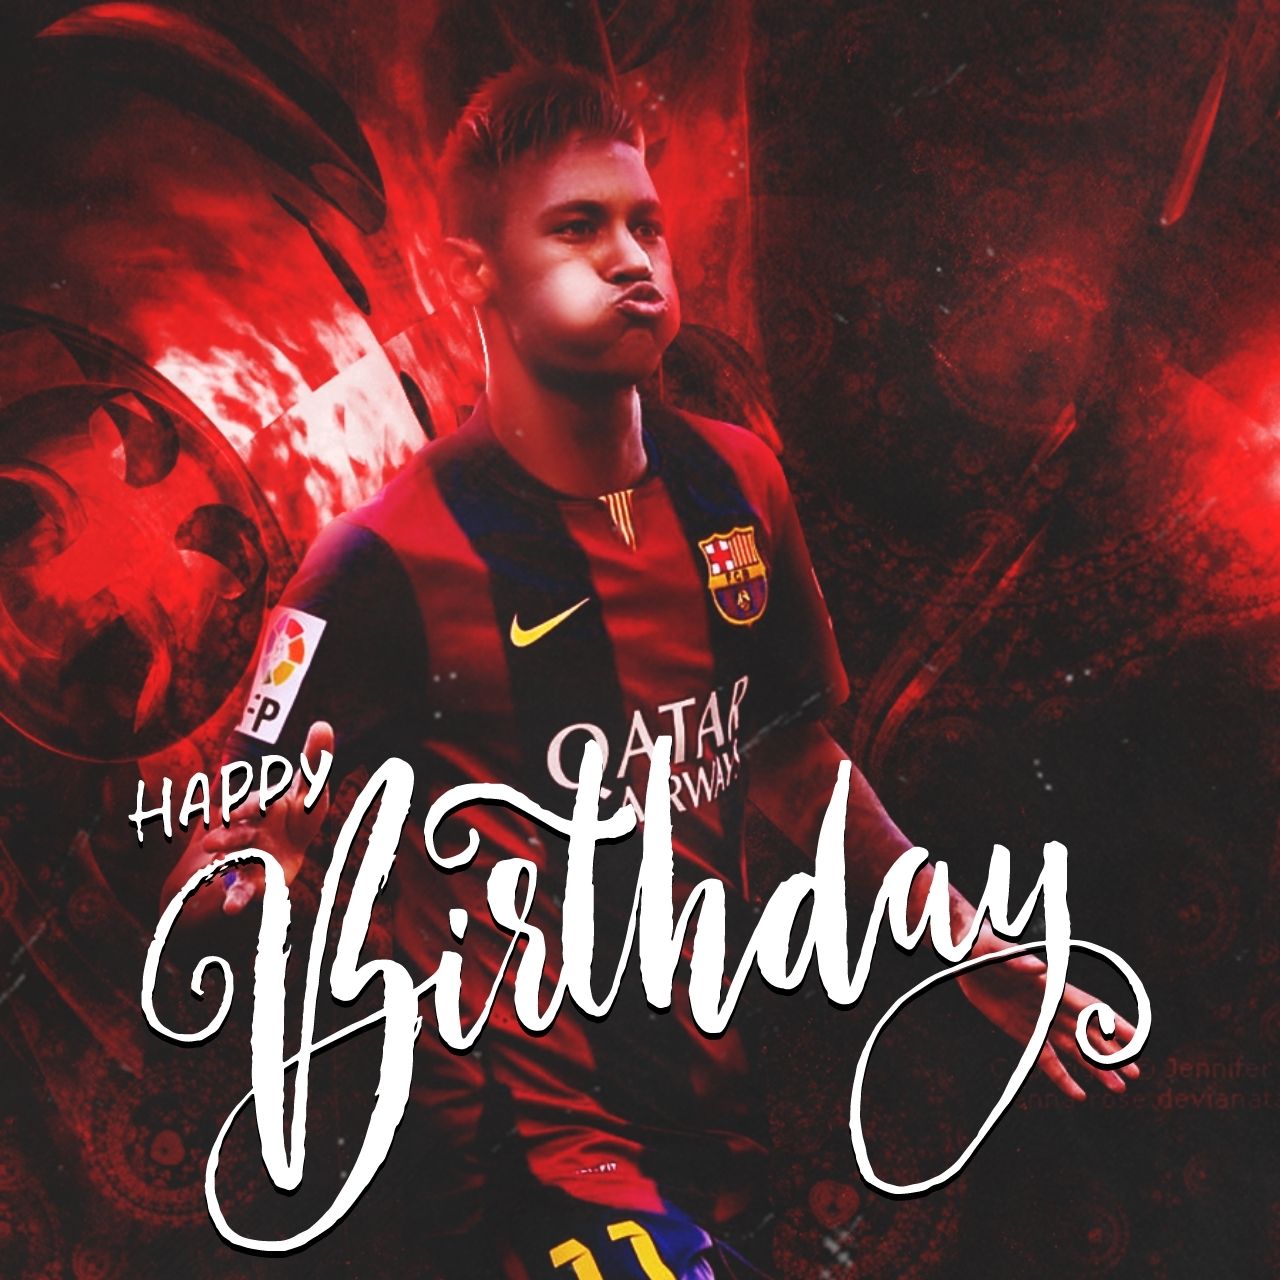 Happy Birthday Neymar Jr: Wishes, HD Images, Quotes, Greetings, Wallpaper,  Instagram Caption to greet 